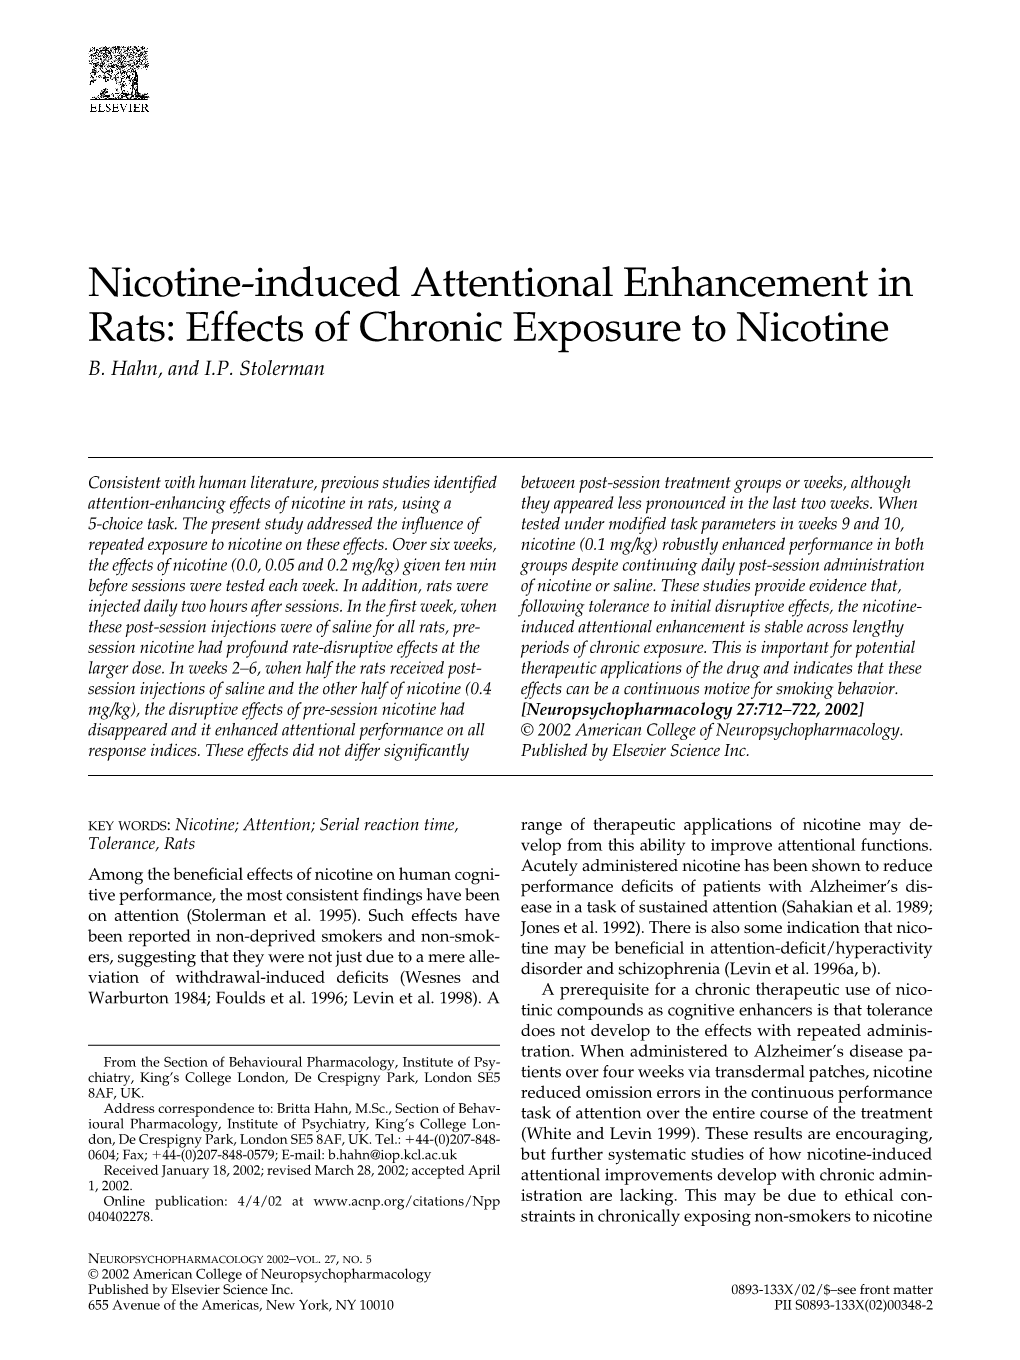 Nicotine-Induced Attentional Enhancement in Rats: Effects of Chronic Exposure to Nicotine B